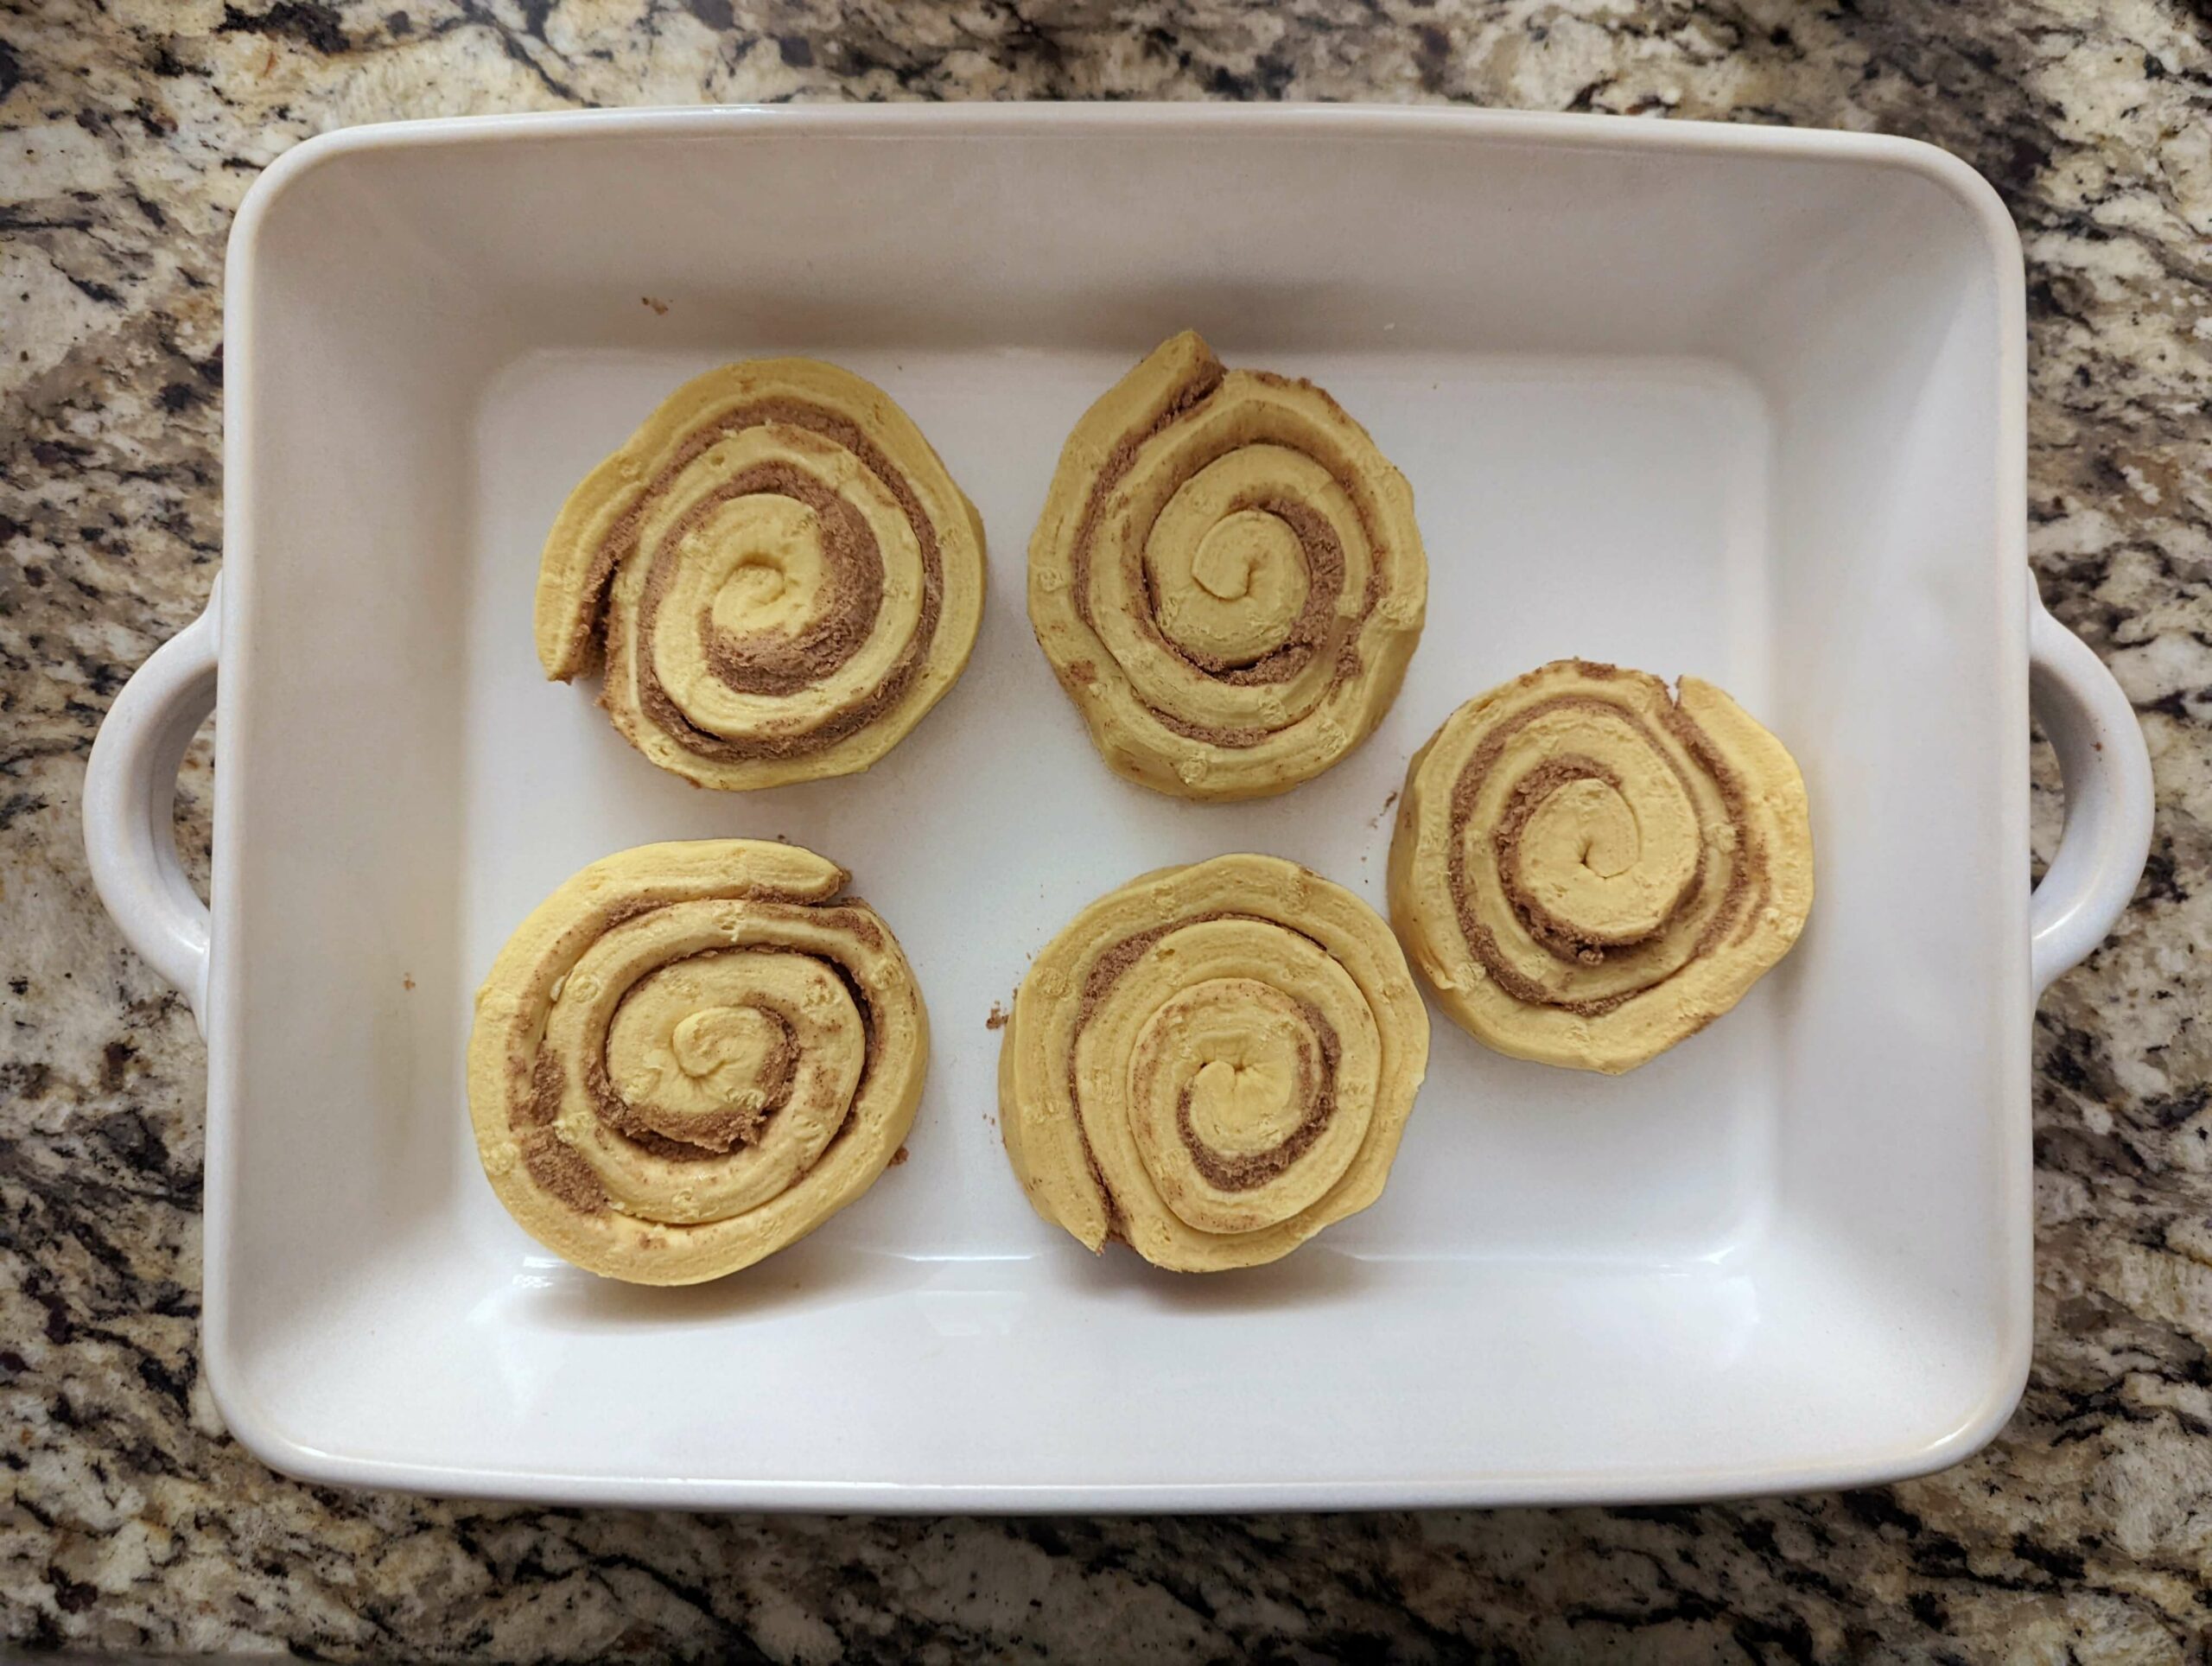 Line the cinnamon rolls into a baking pan with space to expand.